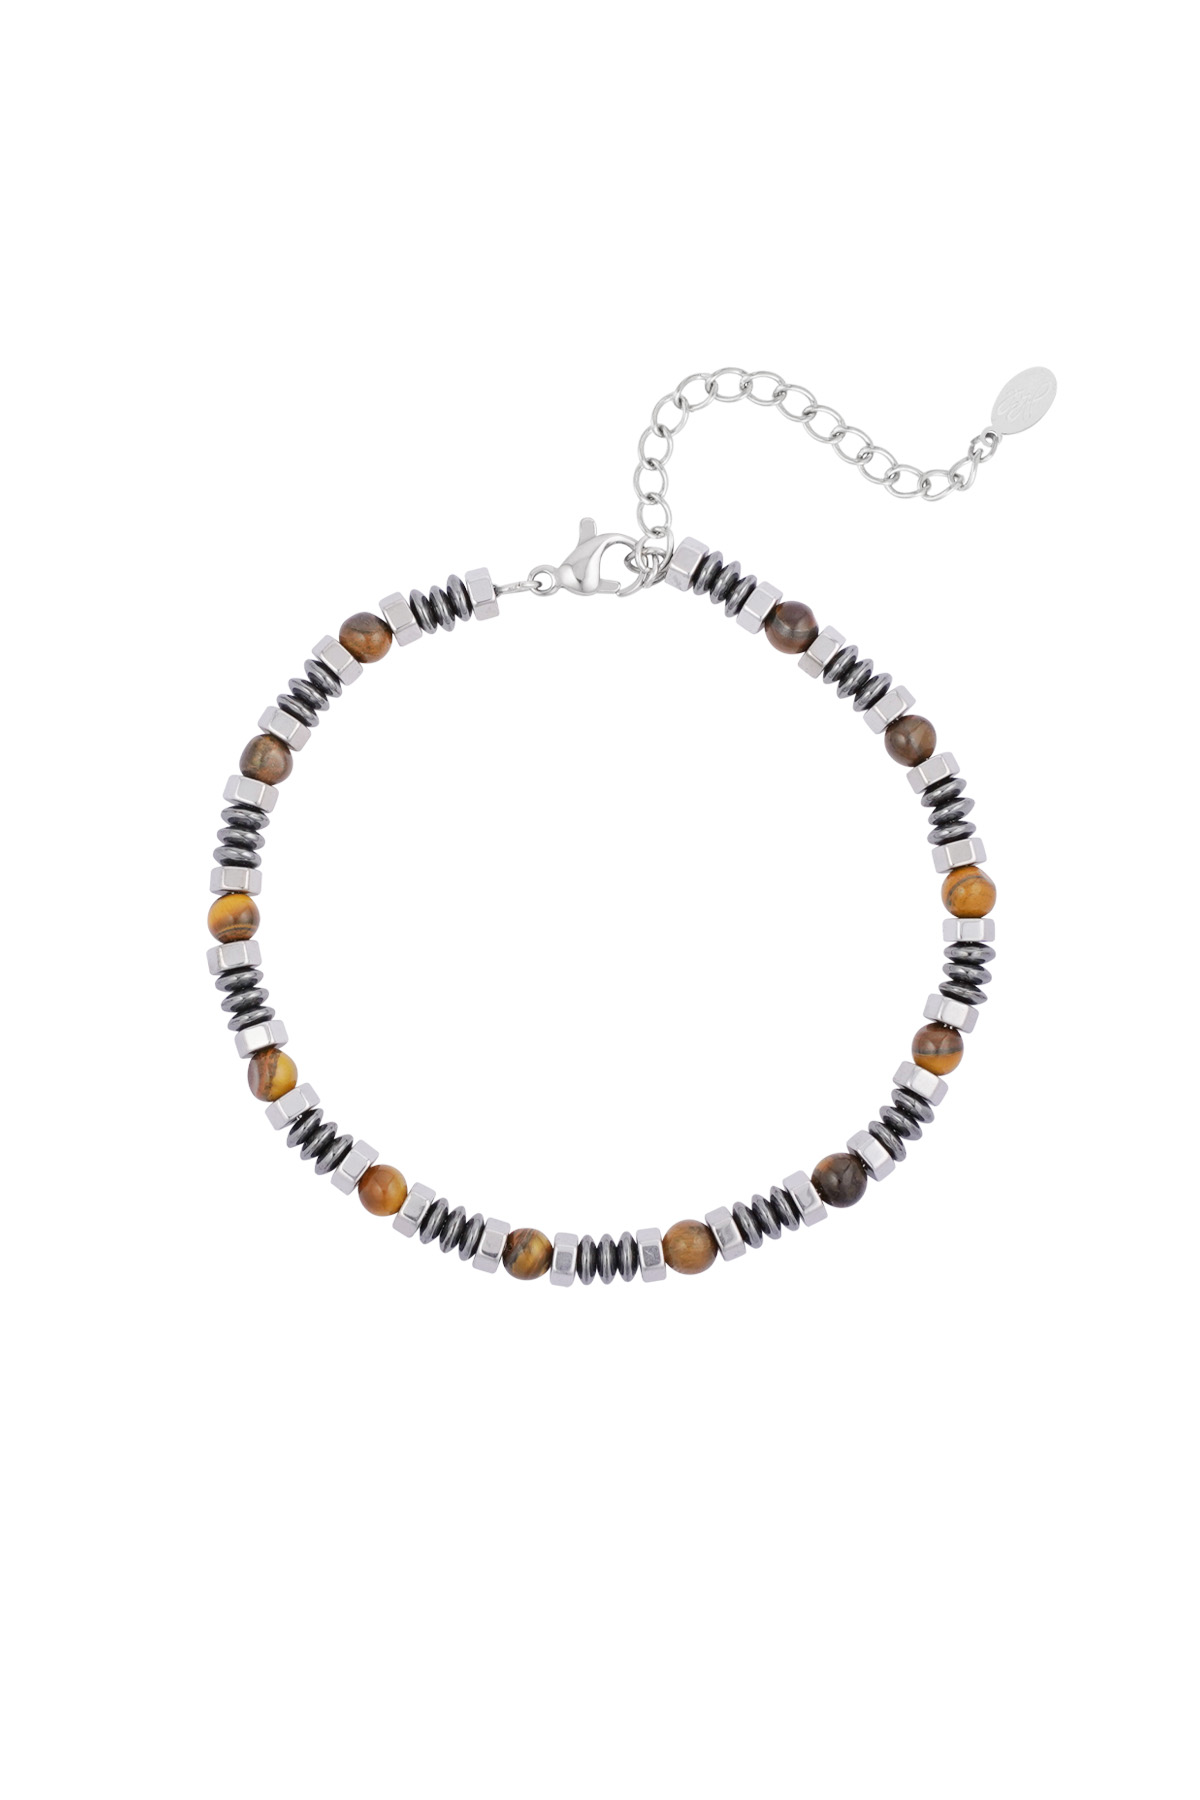 Simple men's bracelet with beads - brown h5 